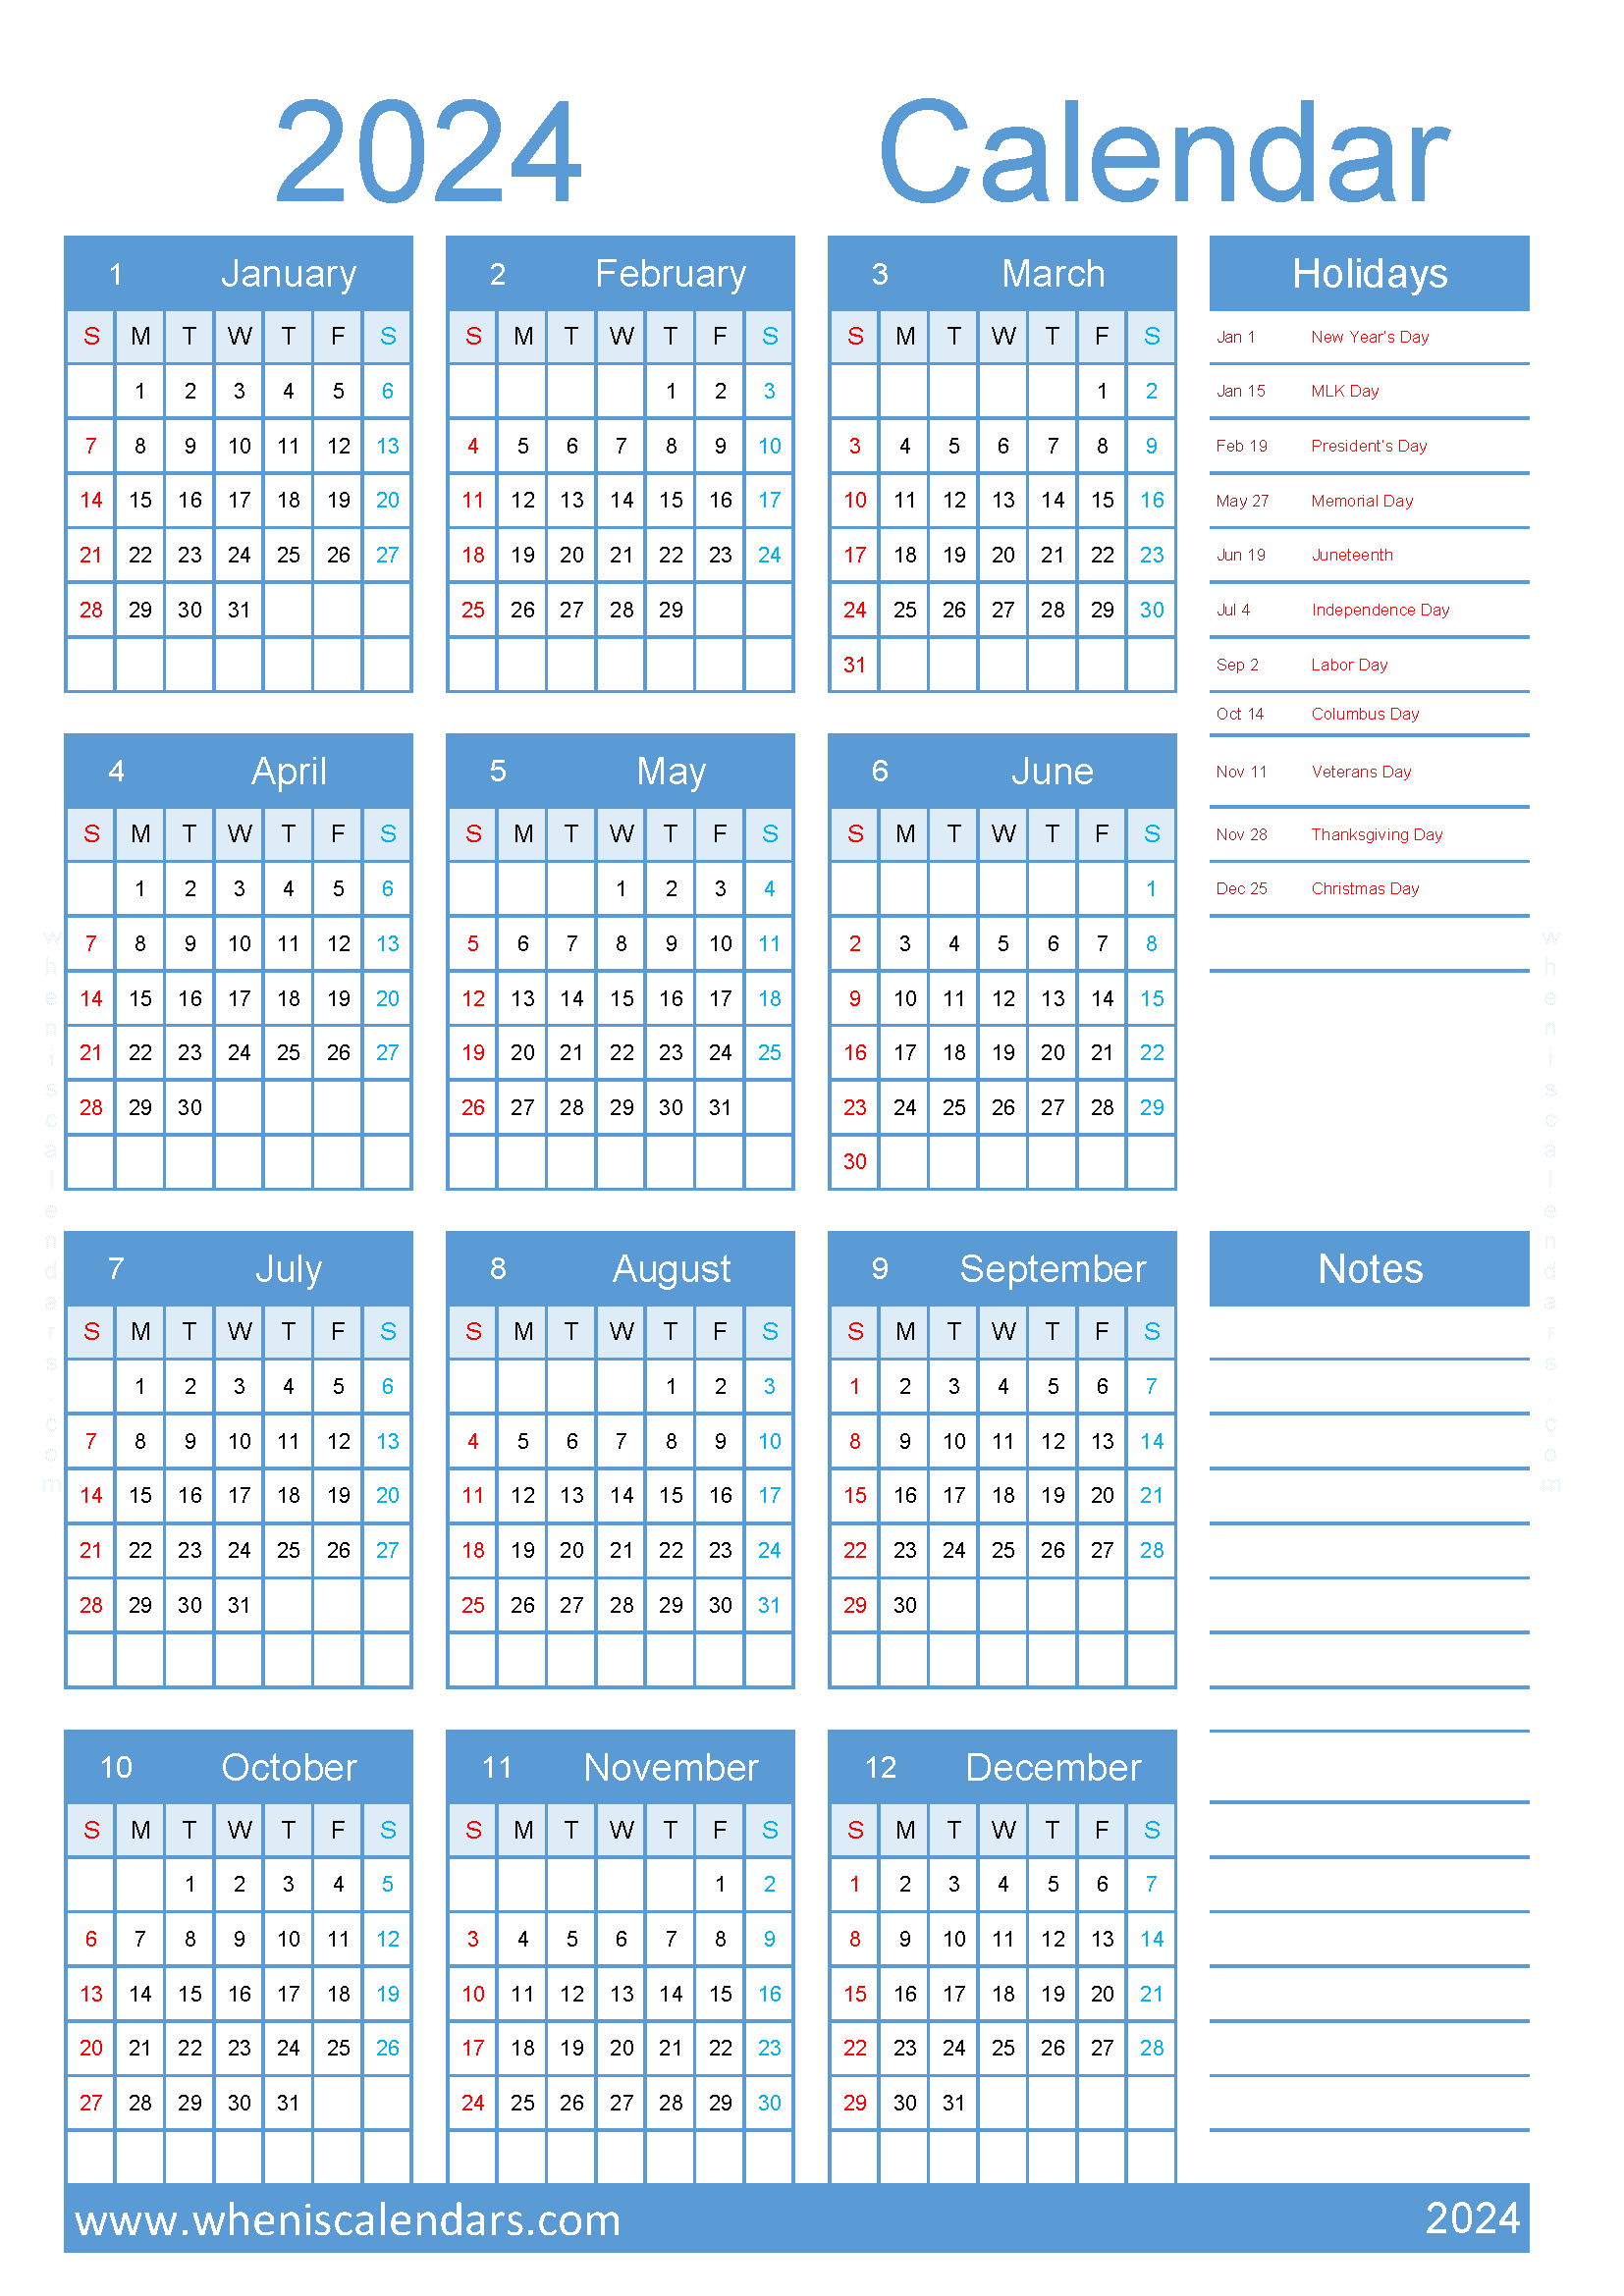 free Calendar 2024 with Holidays printable A4 in vertical portrait